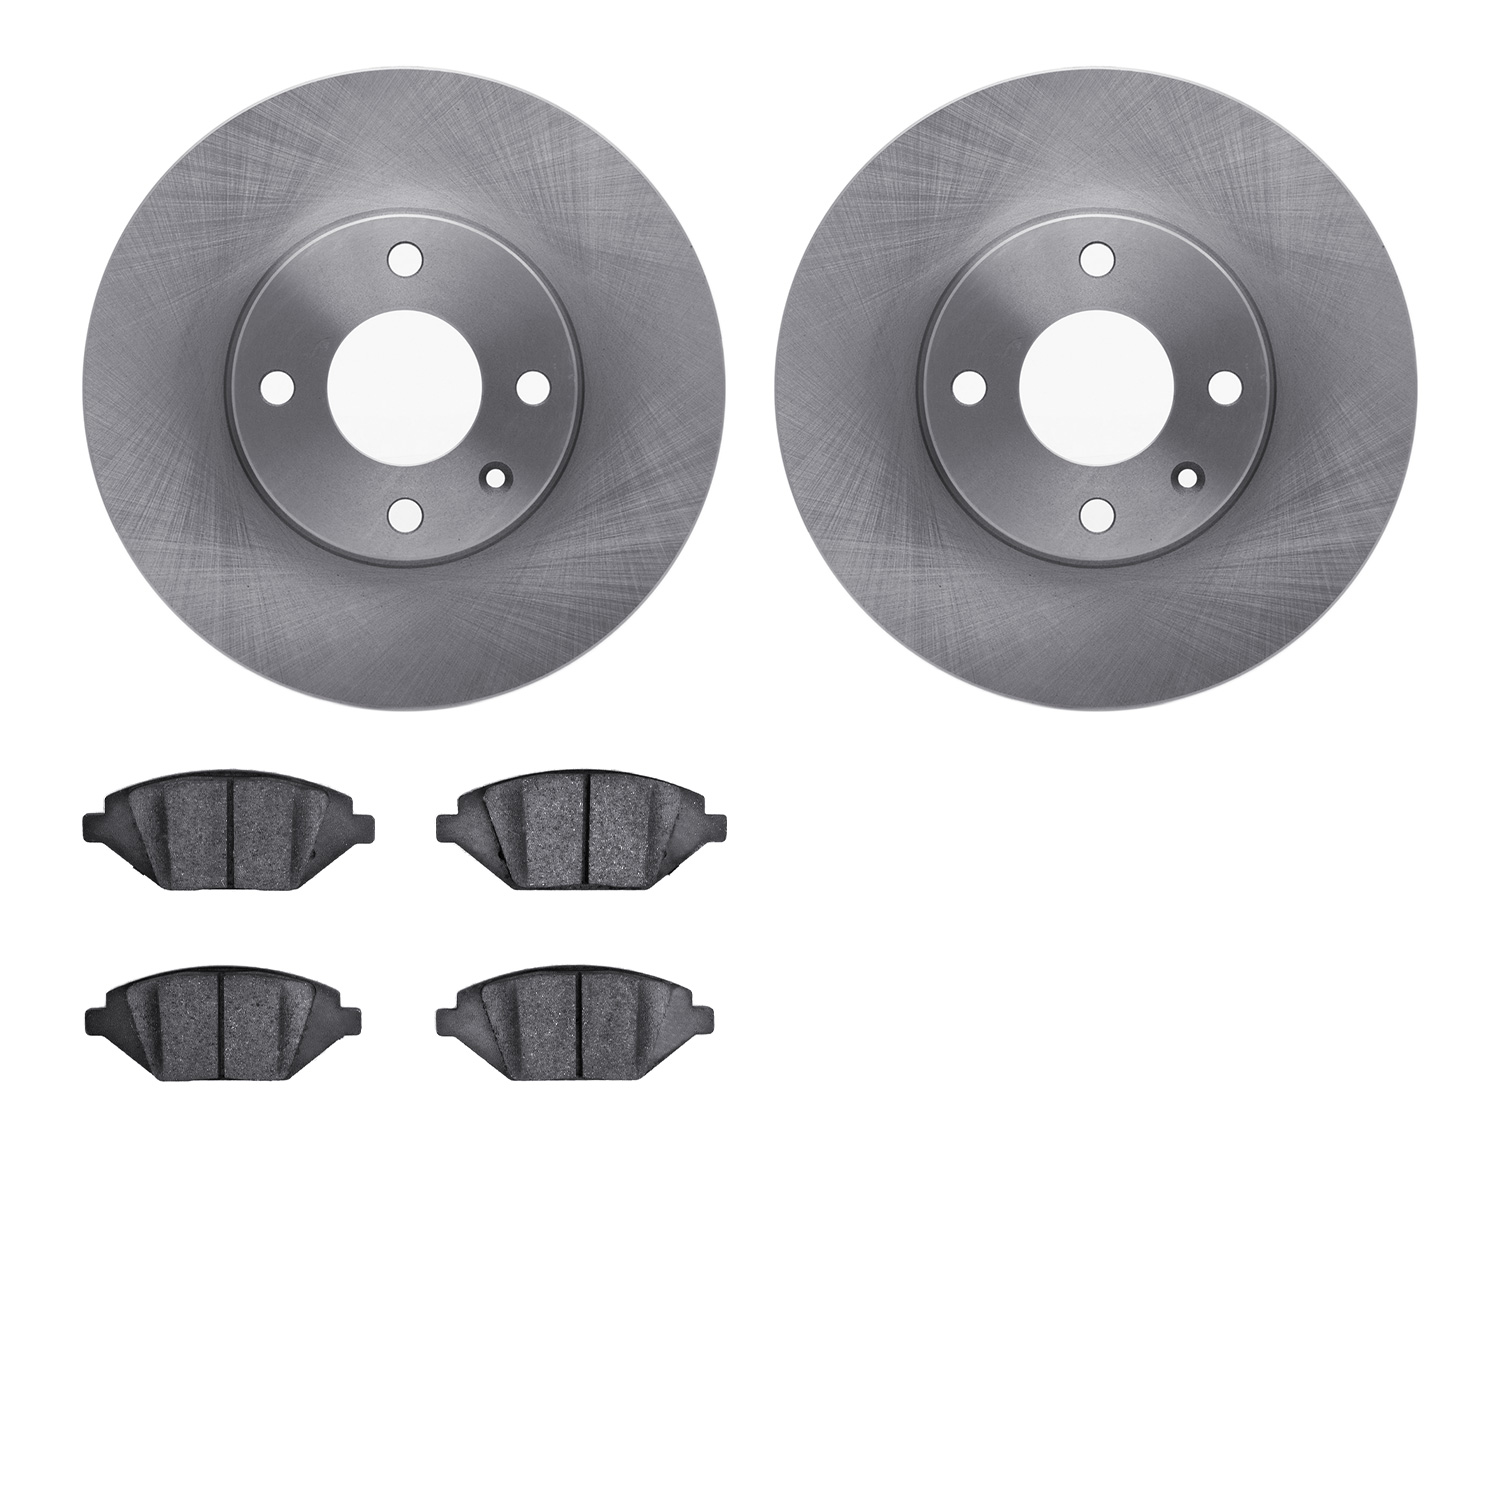 6302-47075 Brake Rotors with 3000-Series Ceramic Brake Pads Kit, Fits Select GM, Position: Front